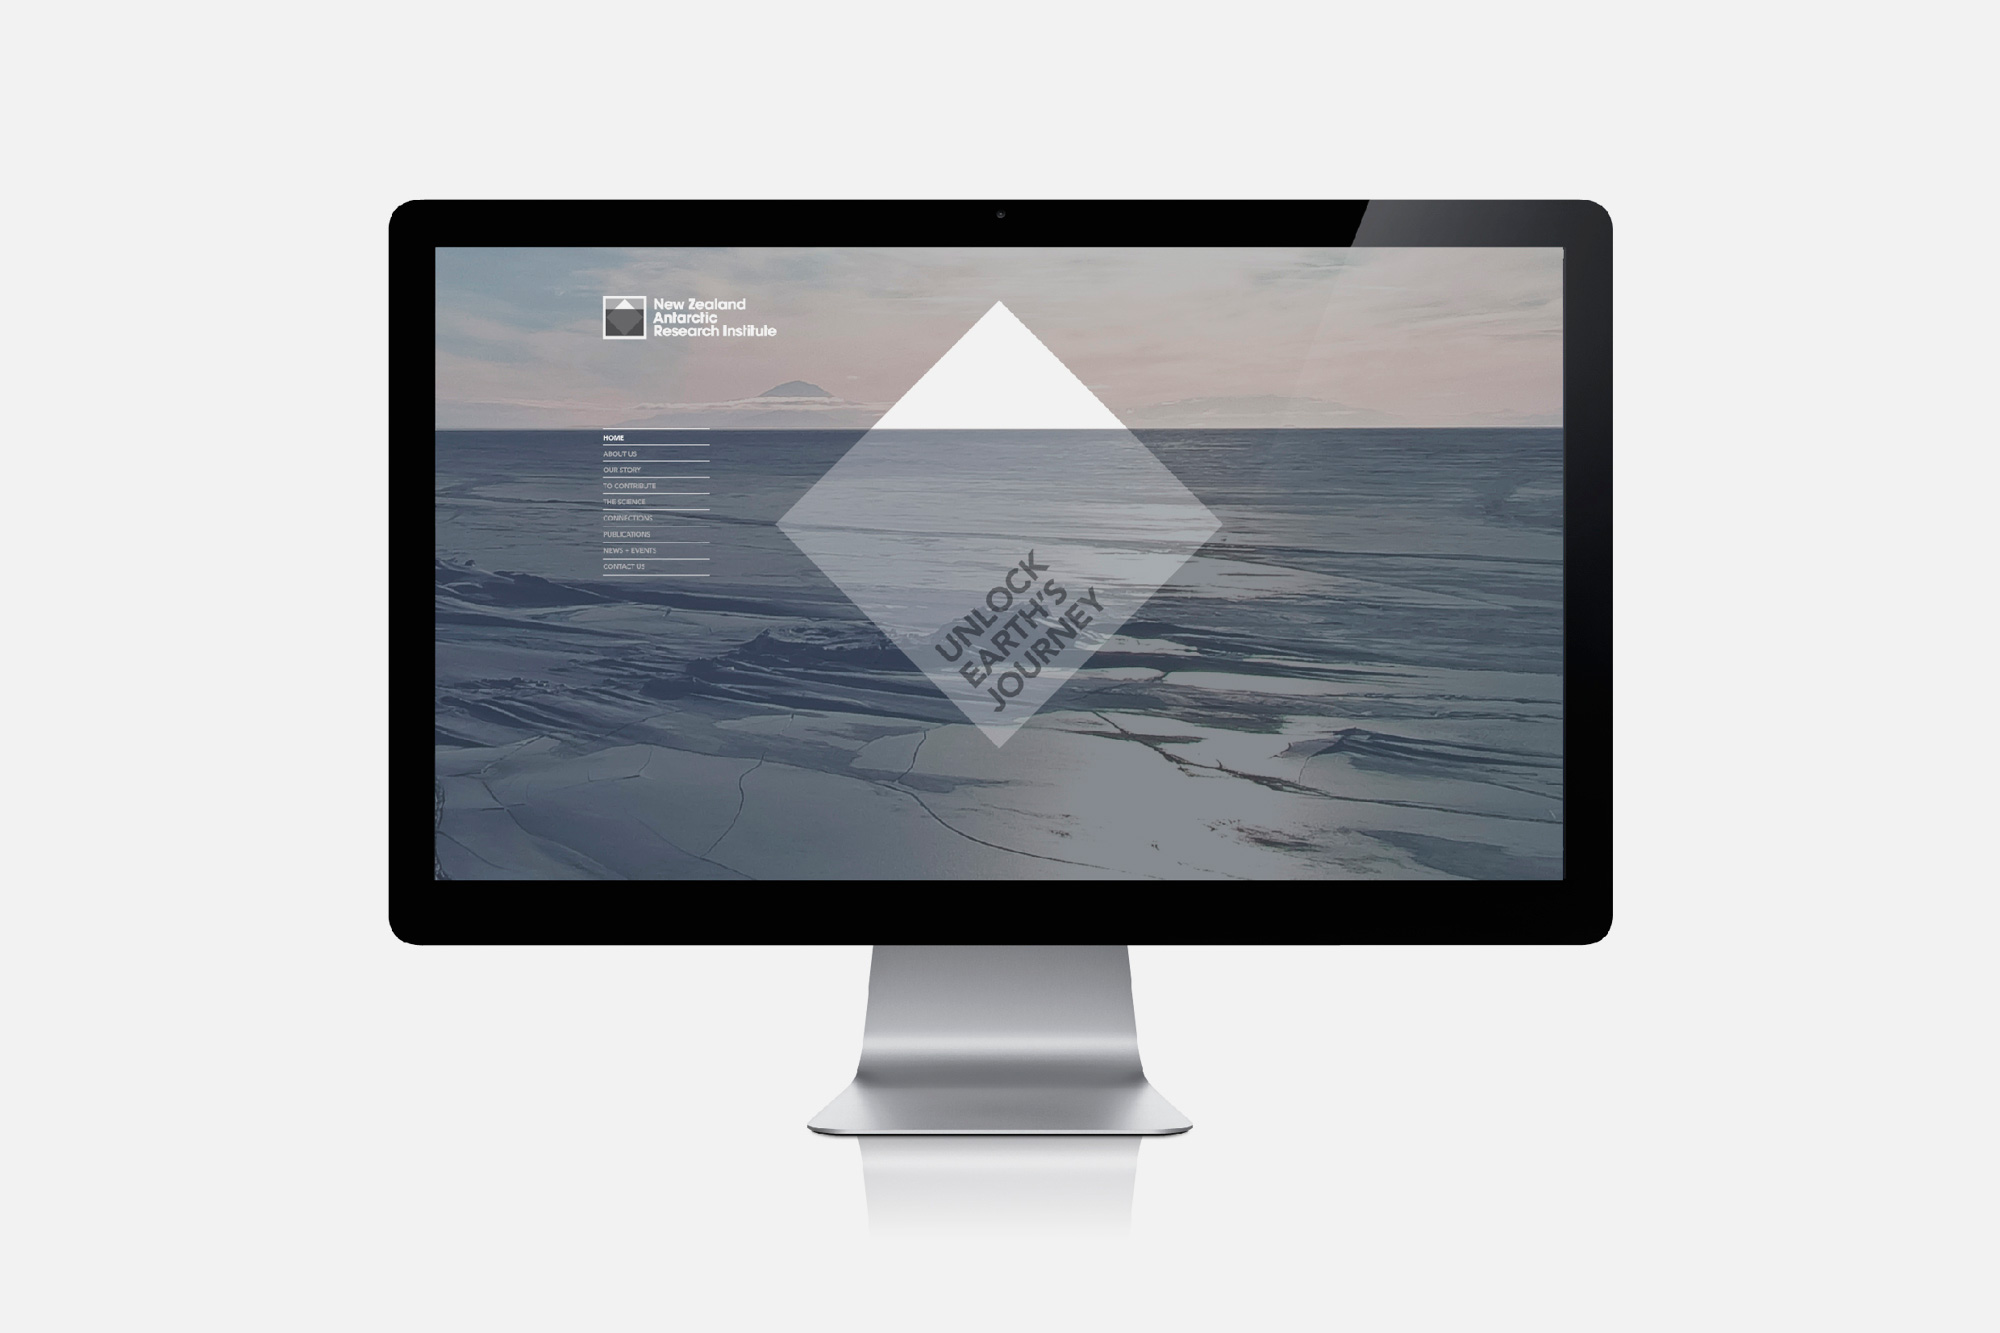 Logo and website created by BRR for New Zealand Antarctic Research Institute 